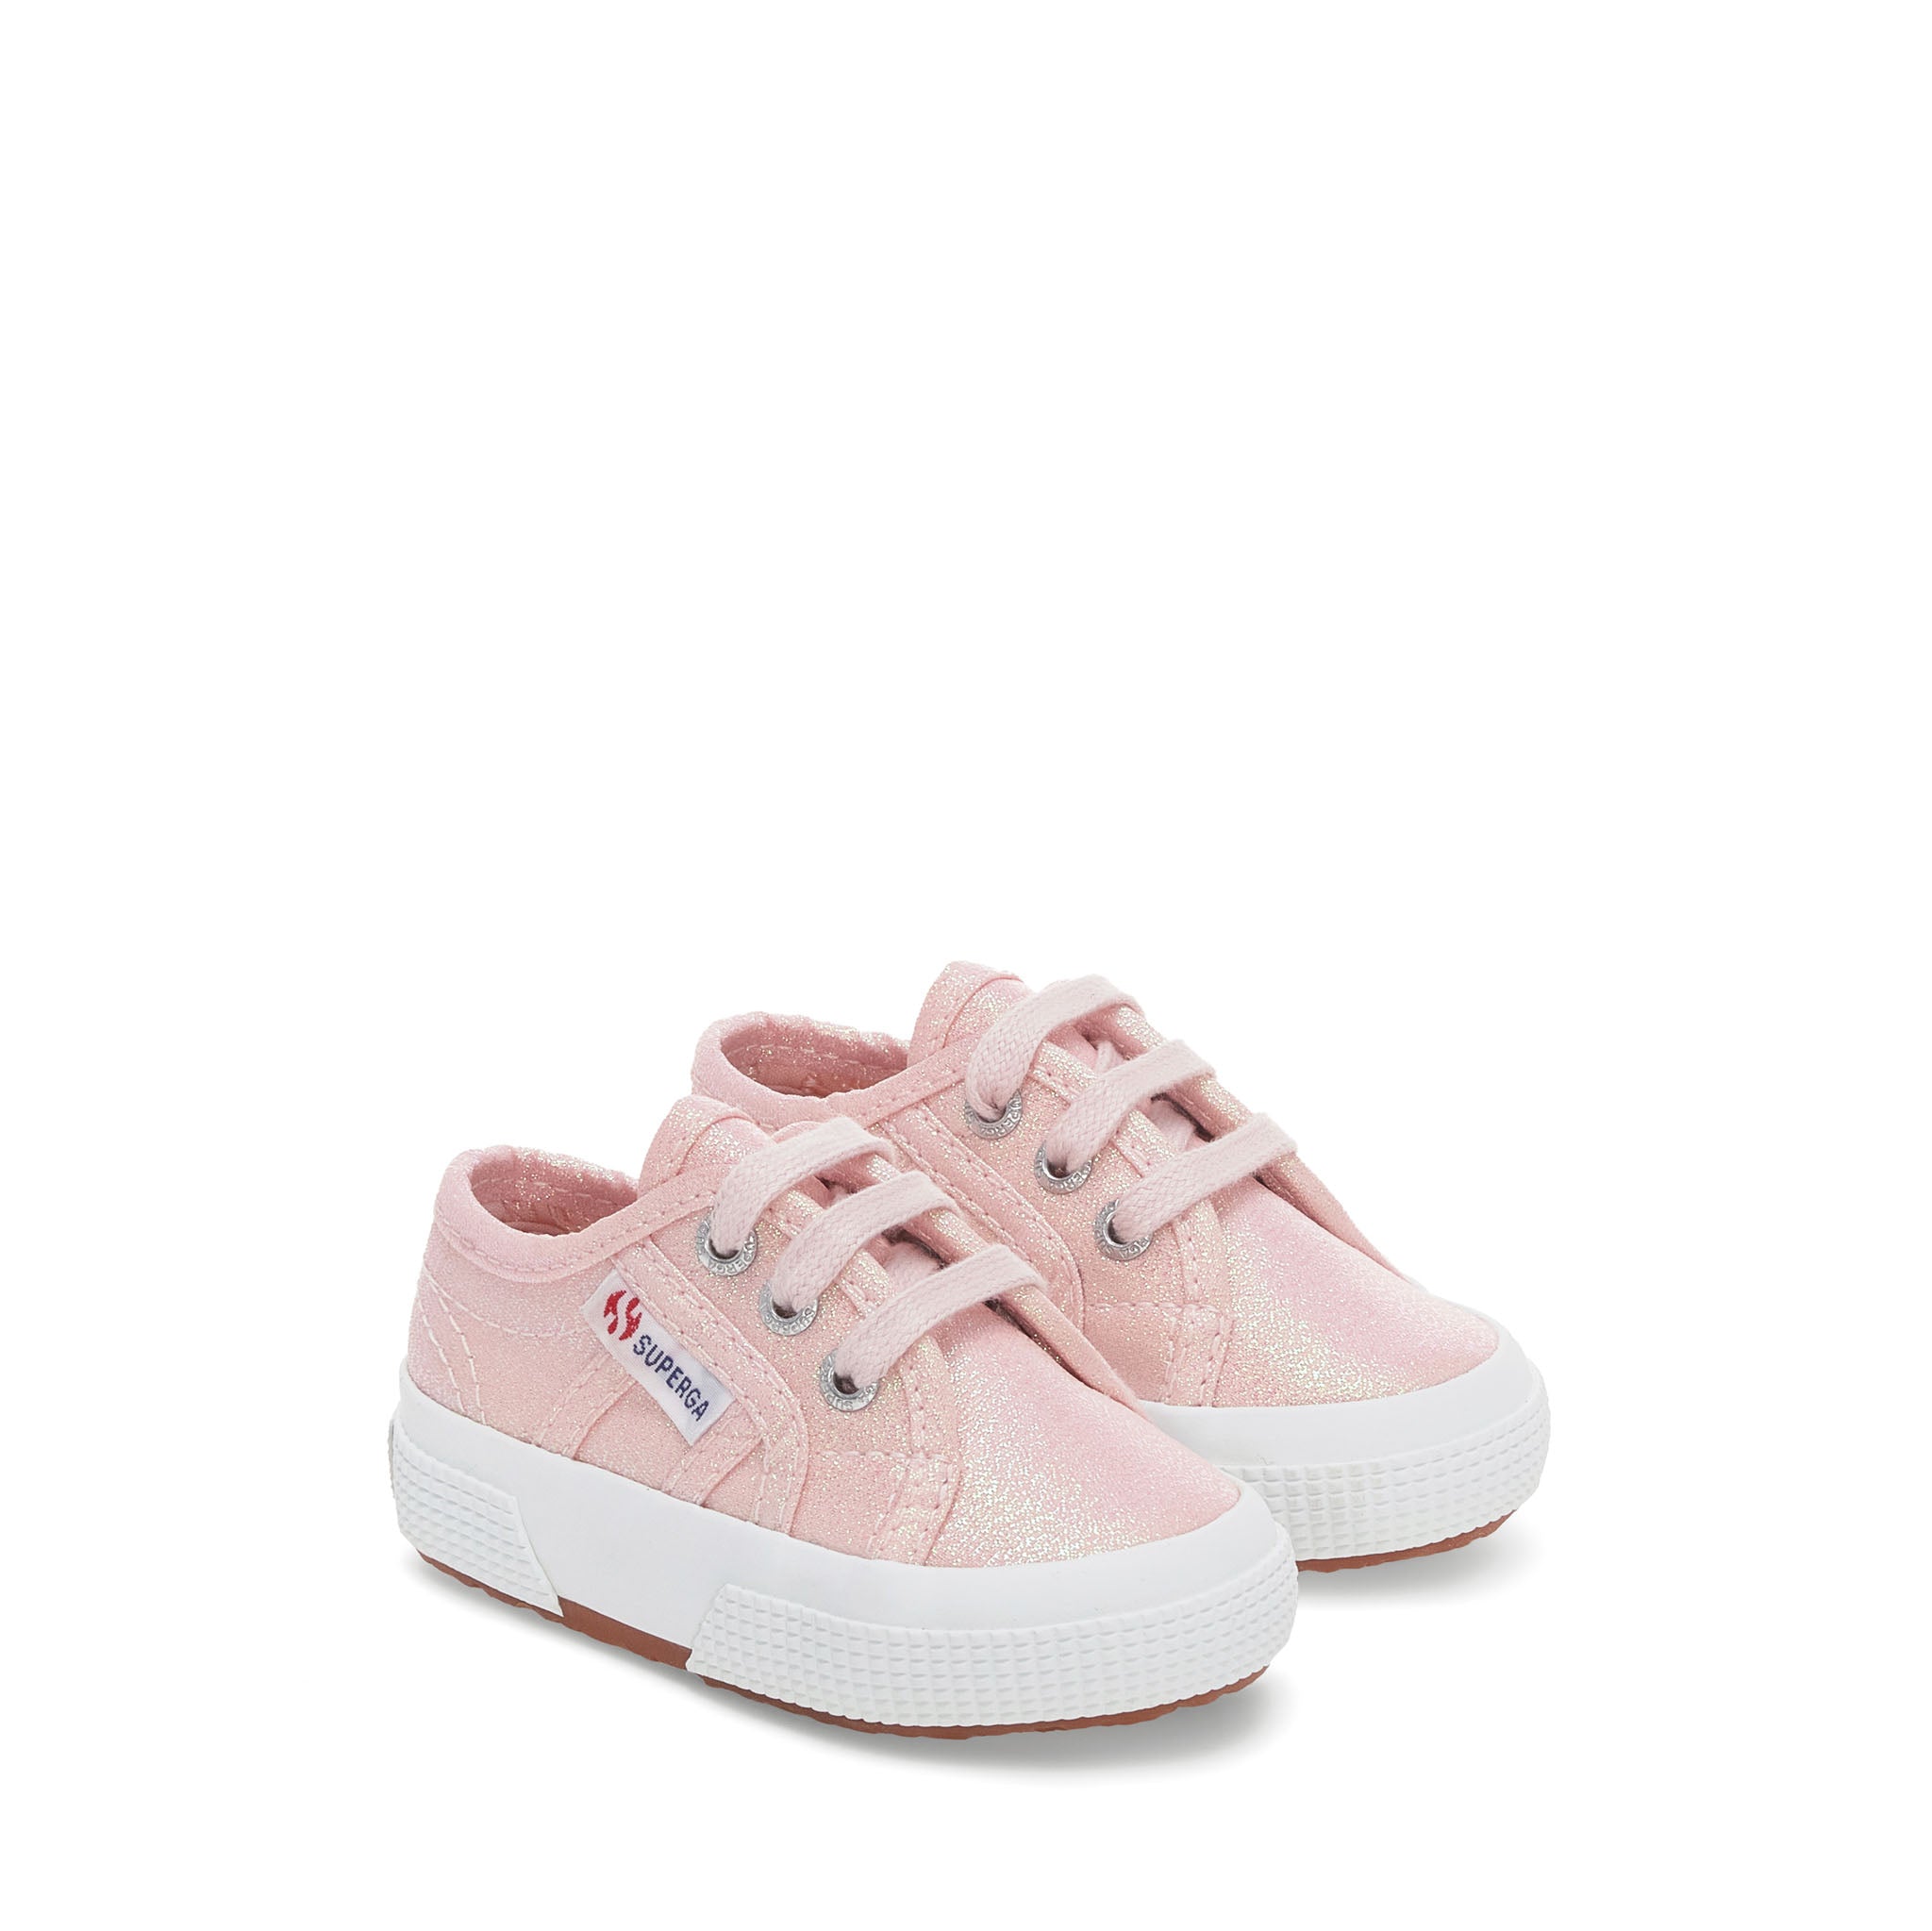 Superga 2750 Baby Lamé Sneakers - Pinkish Iridescent. Front view.